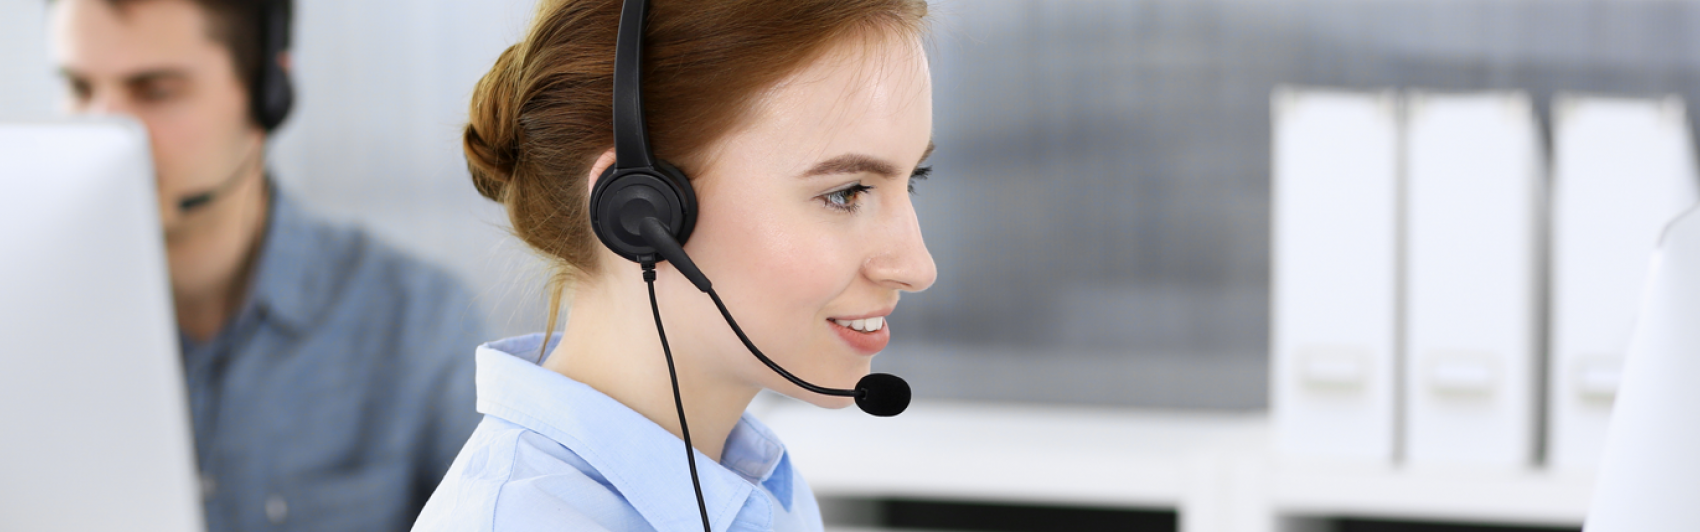 call center; call; operator; business; team; group; woman; happy; support; people; office; businesswoman; headphone; headset; smiling; microphone; work; executive; staff; help desk; working; telemarketing; consultant; teamwork; service; communication